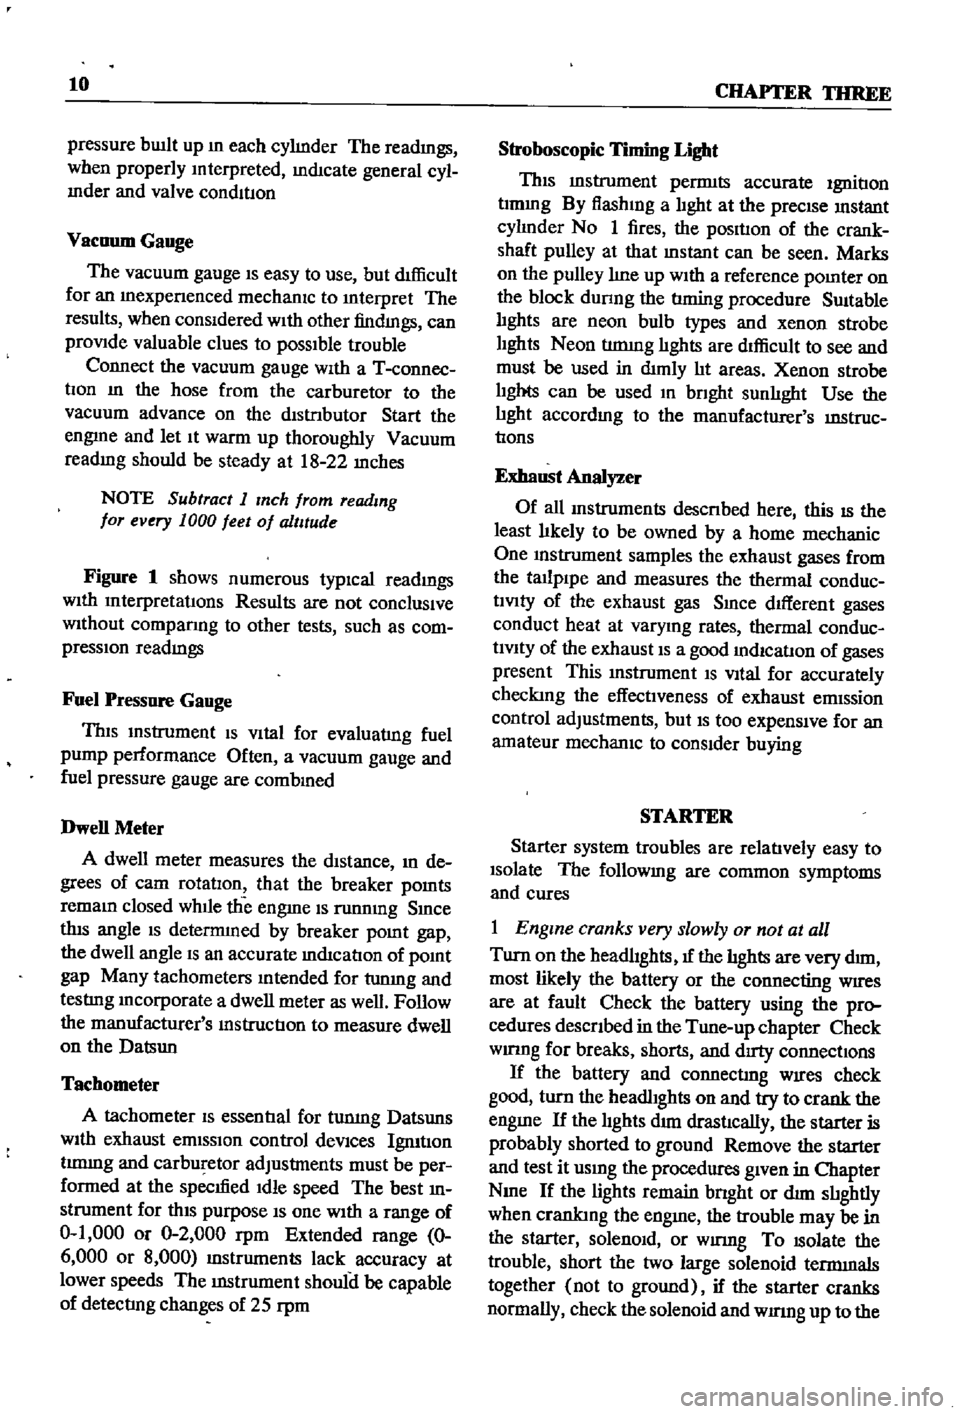 DATSUN 510 1968  Service User Guide 
10 
CHAPTER 
THREE

pressure 
bUllt

up 
In 
each

cylInder 
The

readIngs

when

properly 
Interpreted 
IndIcate

general 
cyl

Inder 
and 
valve 
condltlOn

Vacuum

Gauge

The 
vacuum

gauge 
IS

e